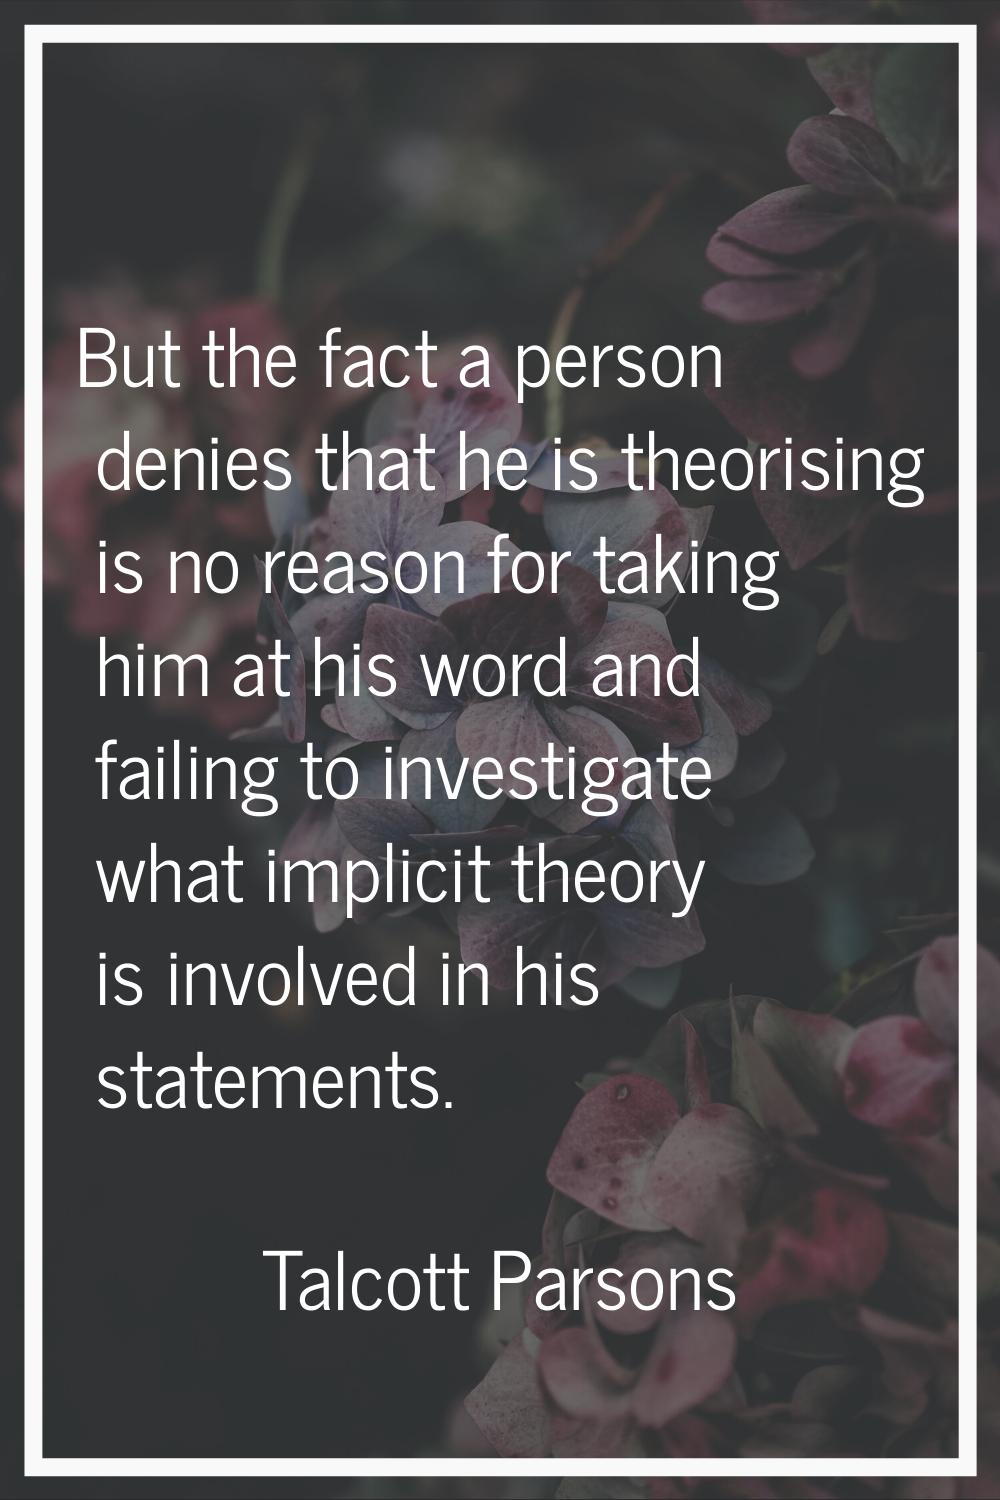 But the fact a person denies that he is theorising is no reason for taking him at his word and fail